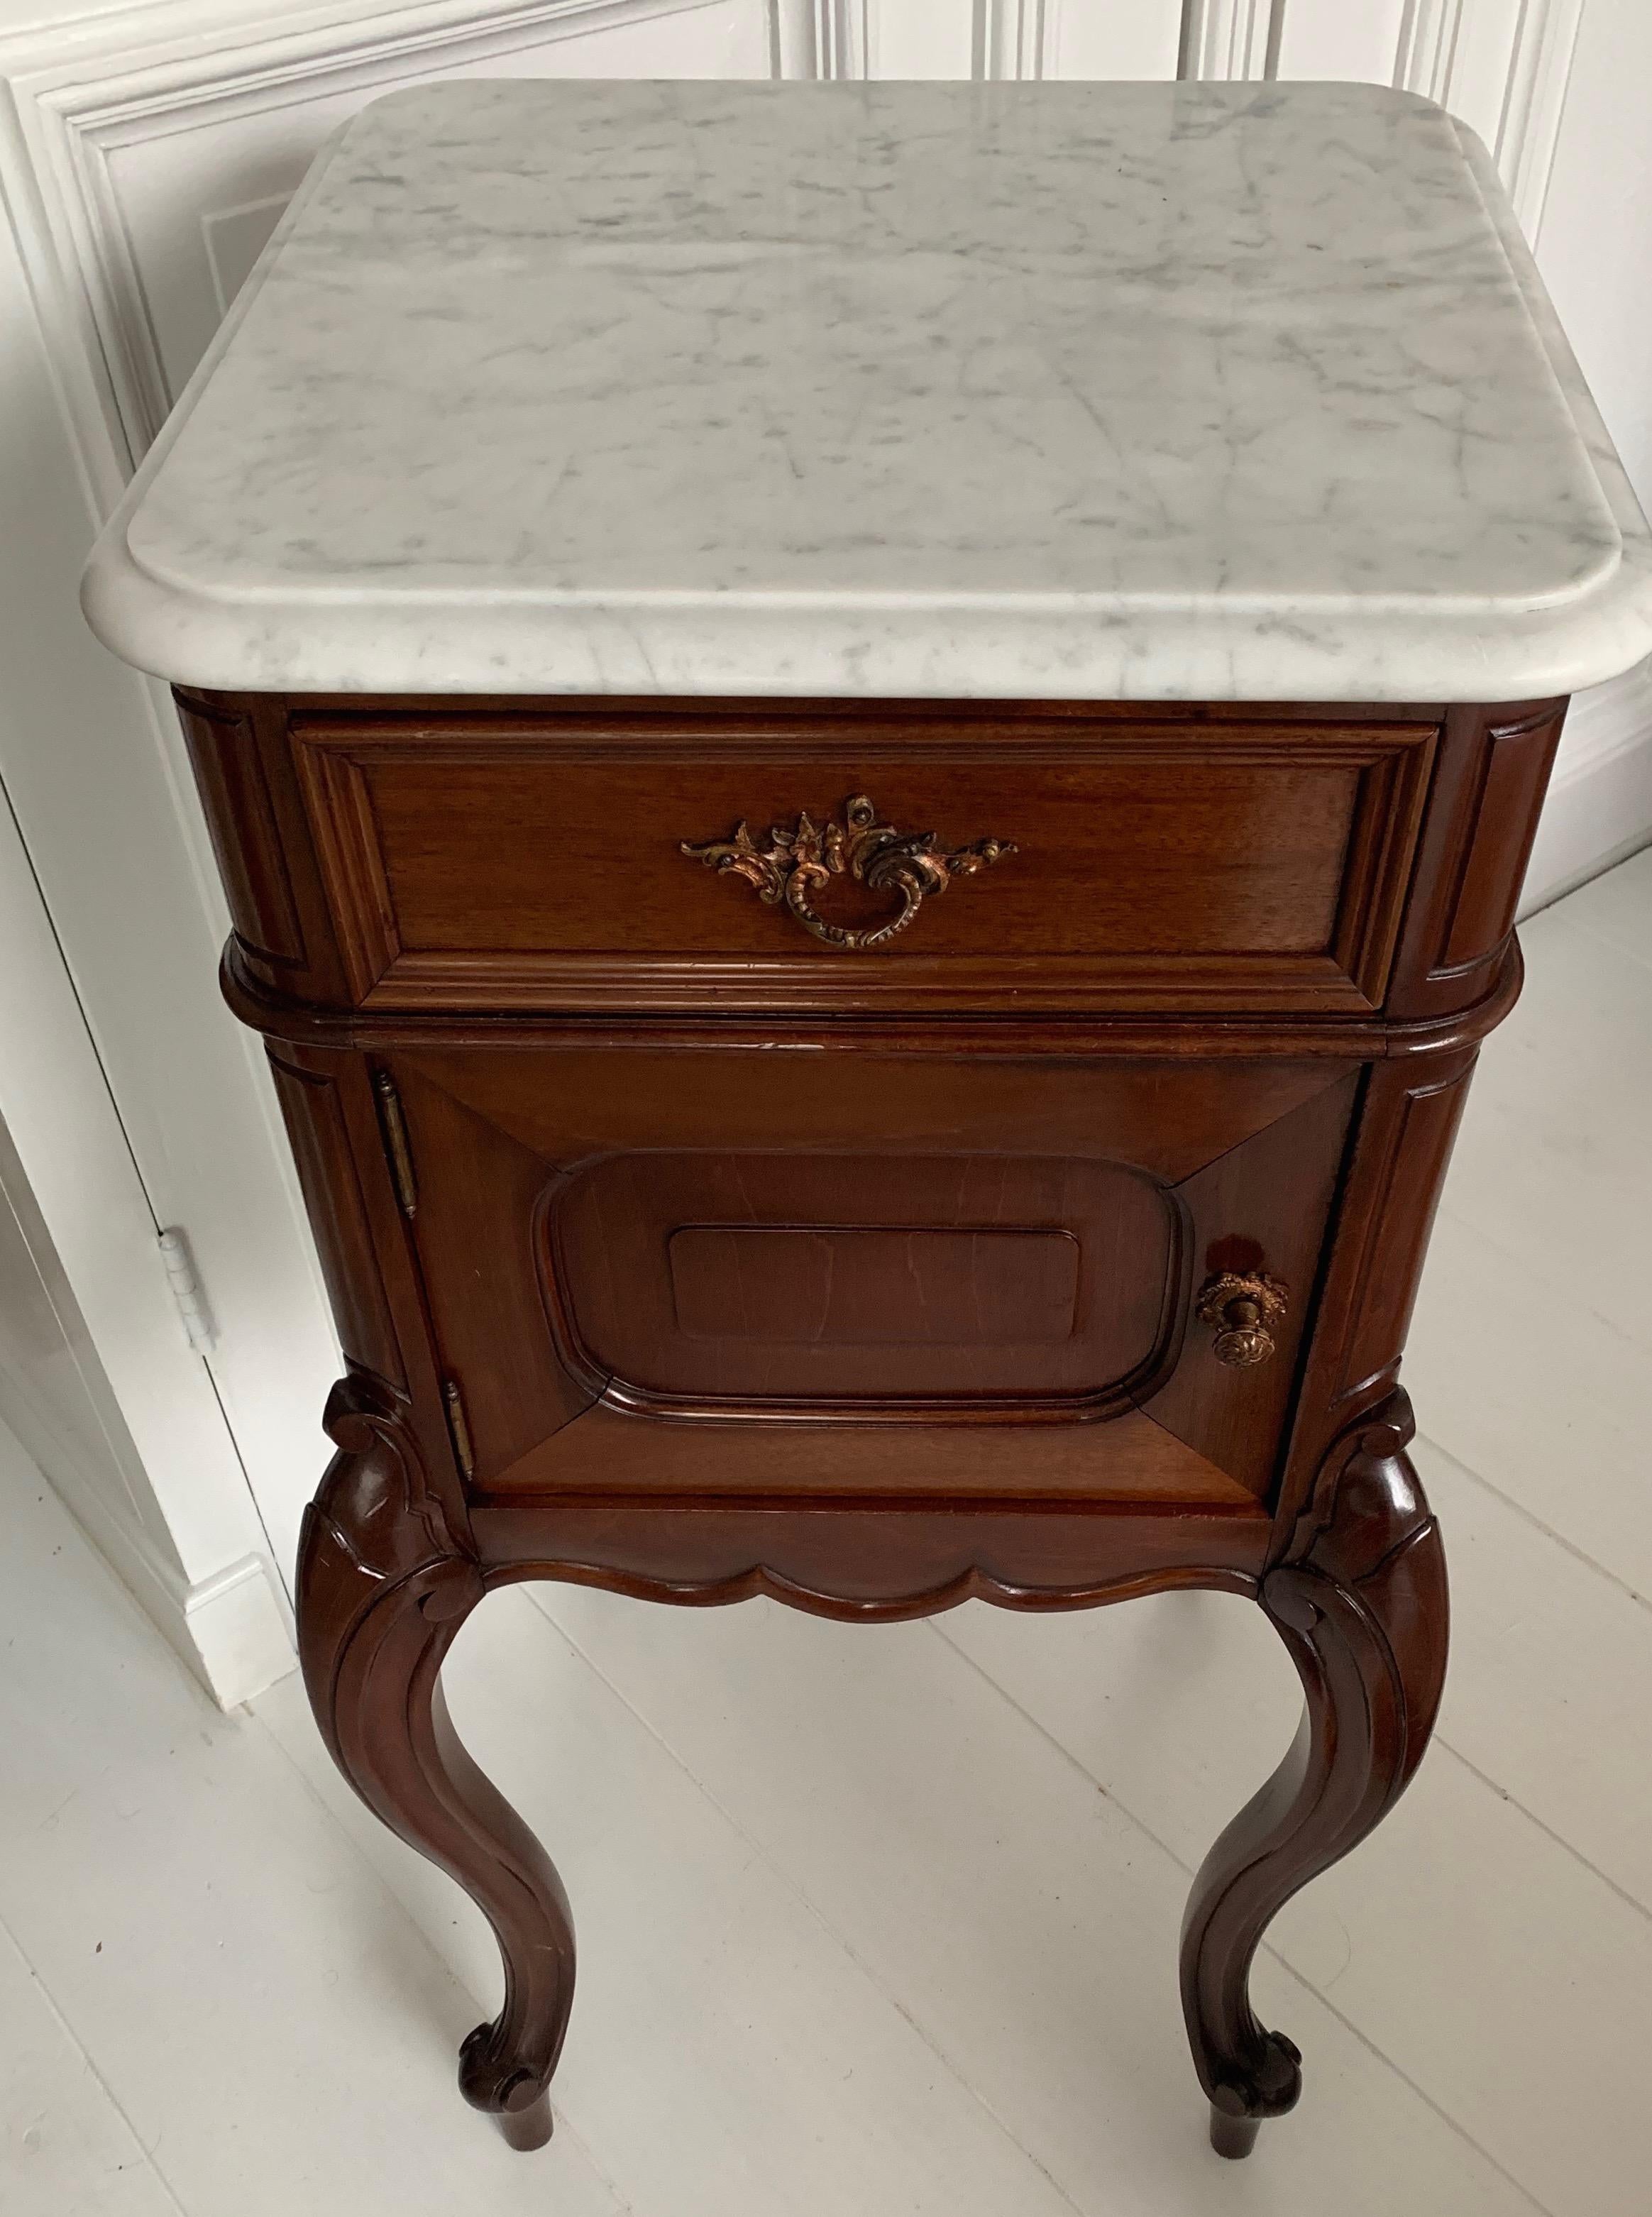 Hand-Carved Wonderful Nutwood Bedside Cabinets / Night Stands w. Snow White Marble Tops For Sale